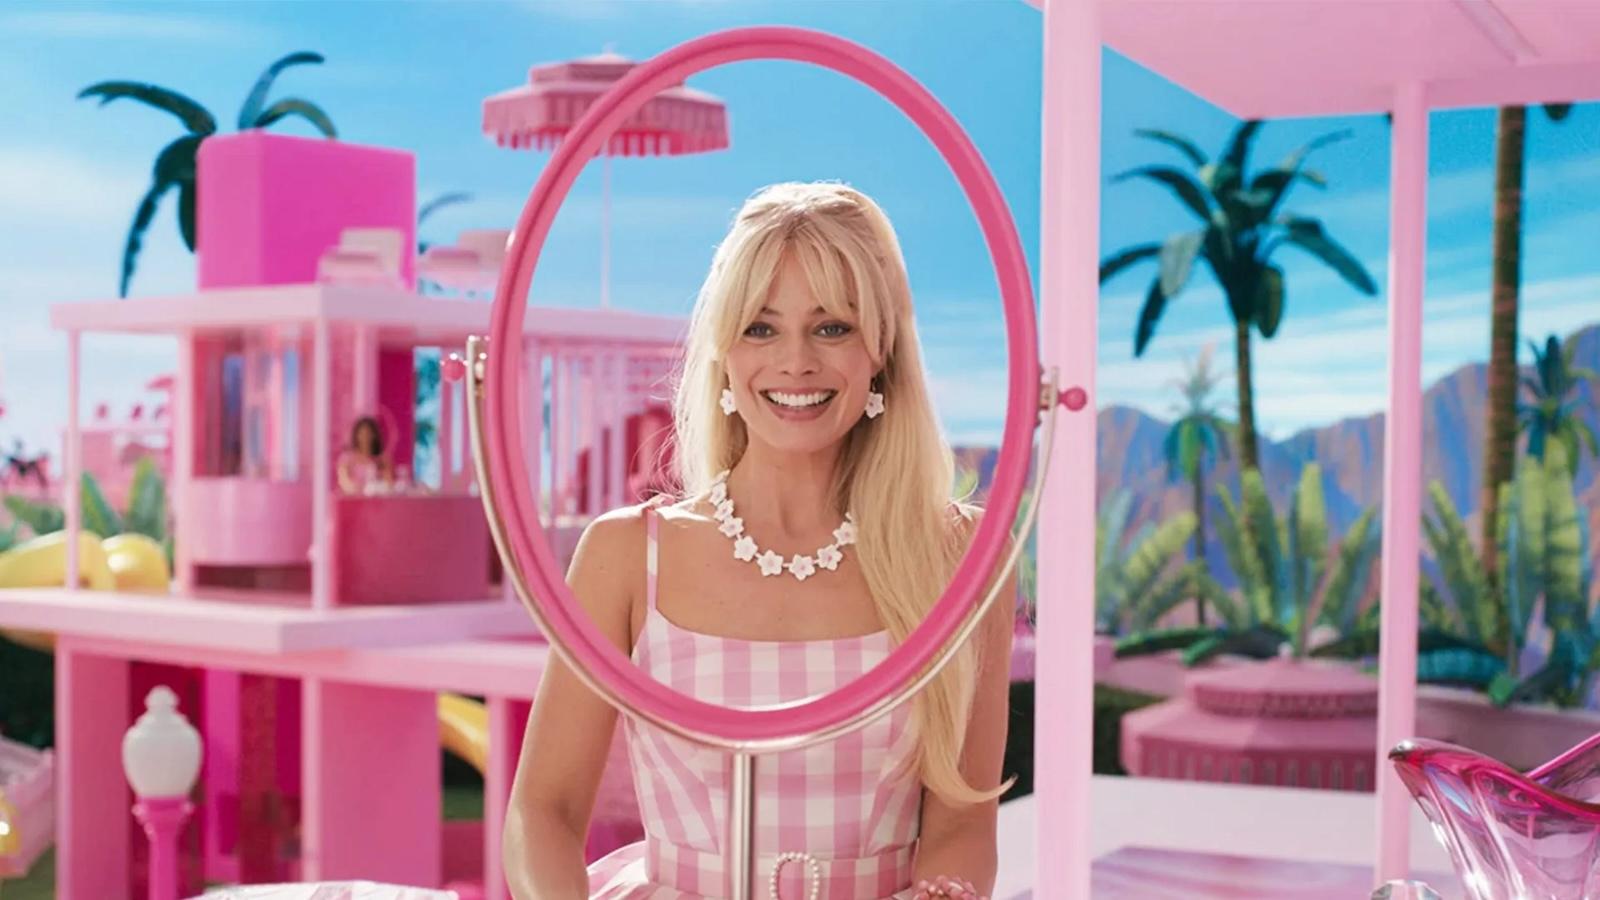 Screenshot of Margot Robbie in the Barbie movie for AgencyAnalytics article on inspirational movie quotes for agencies.